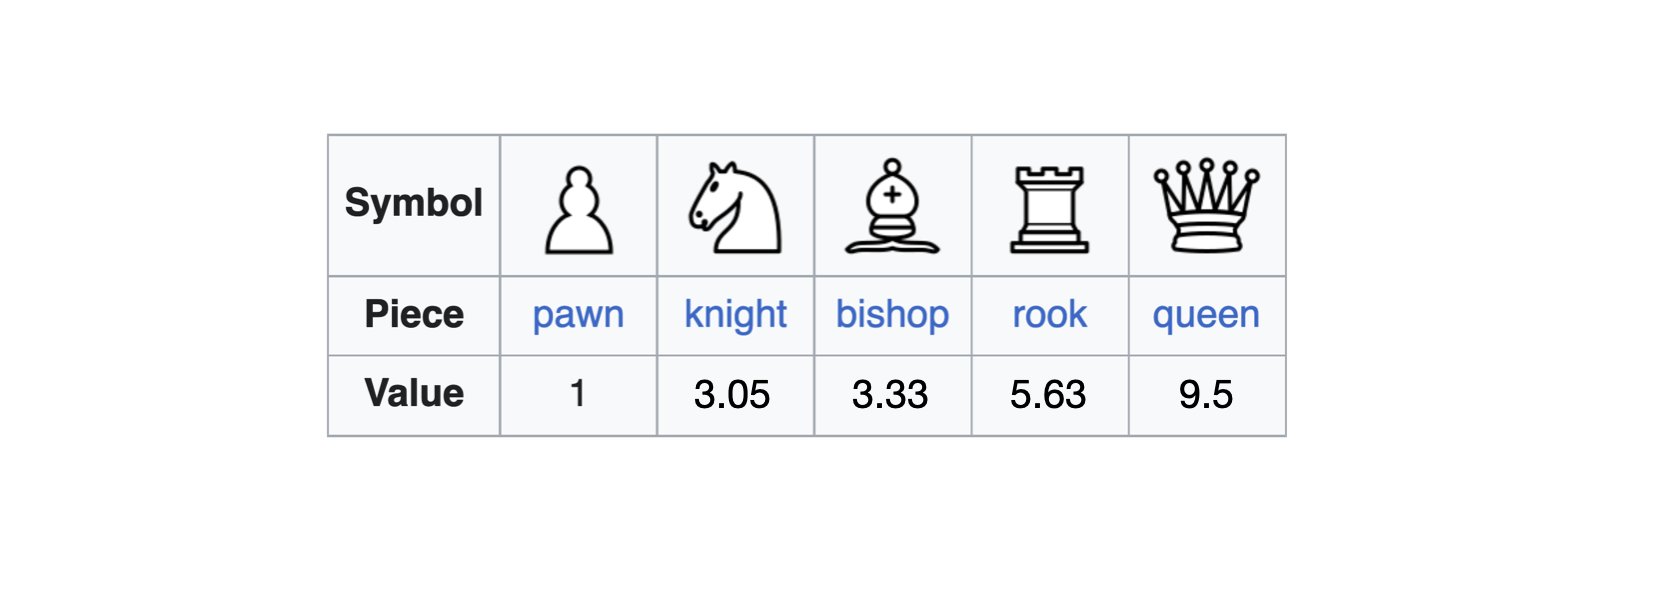 Chess pieces names and values